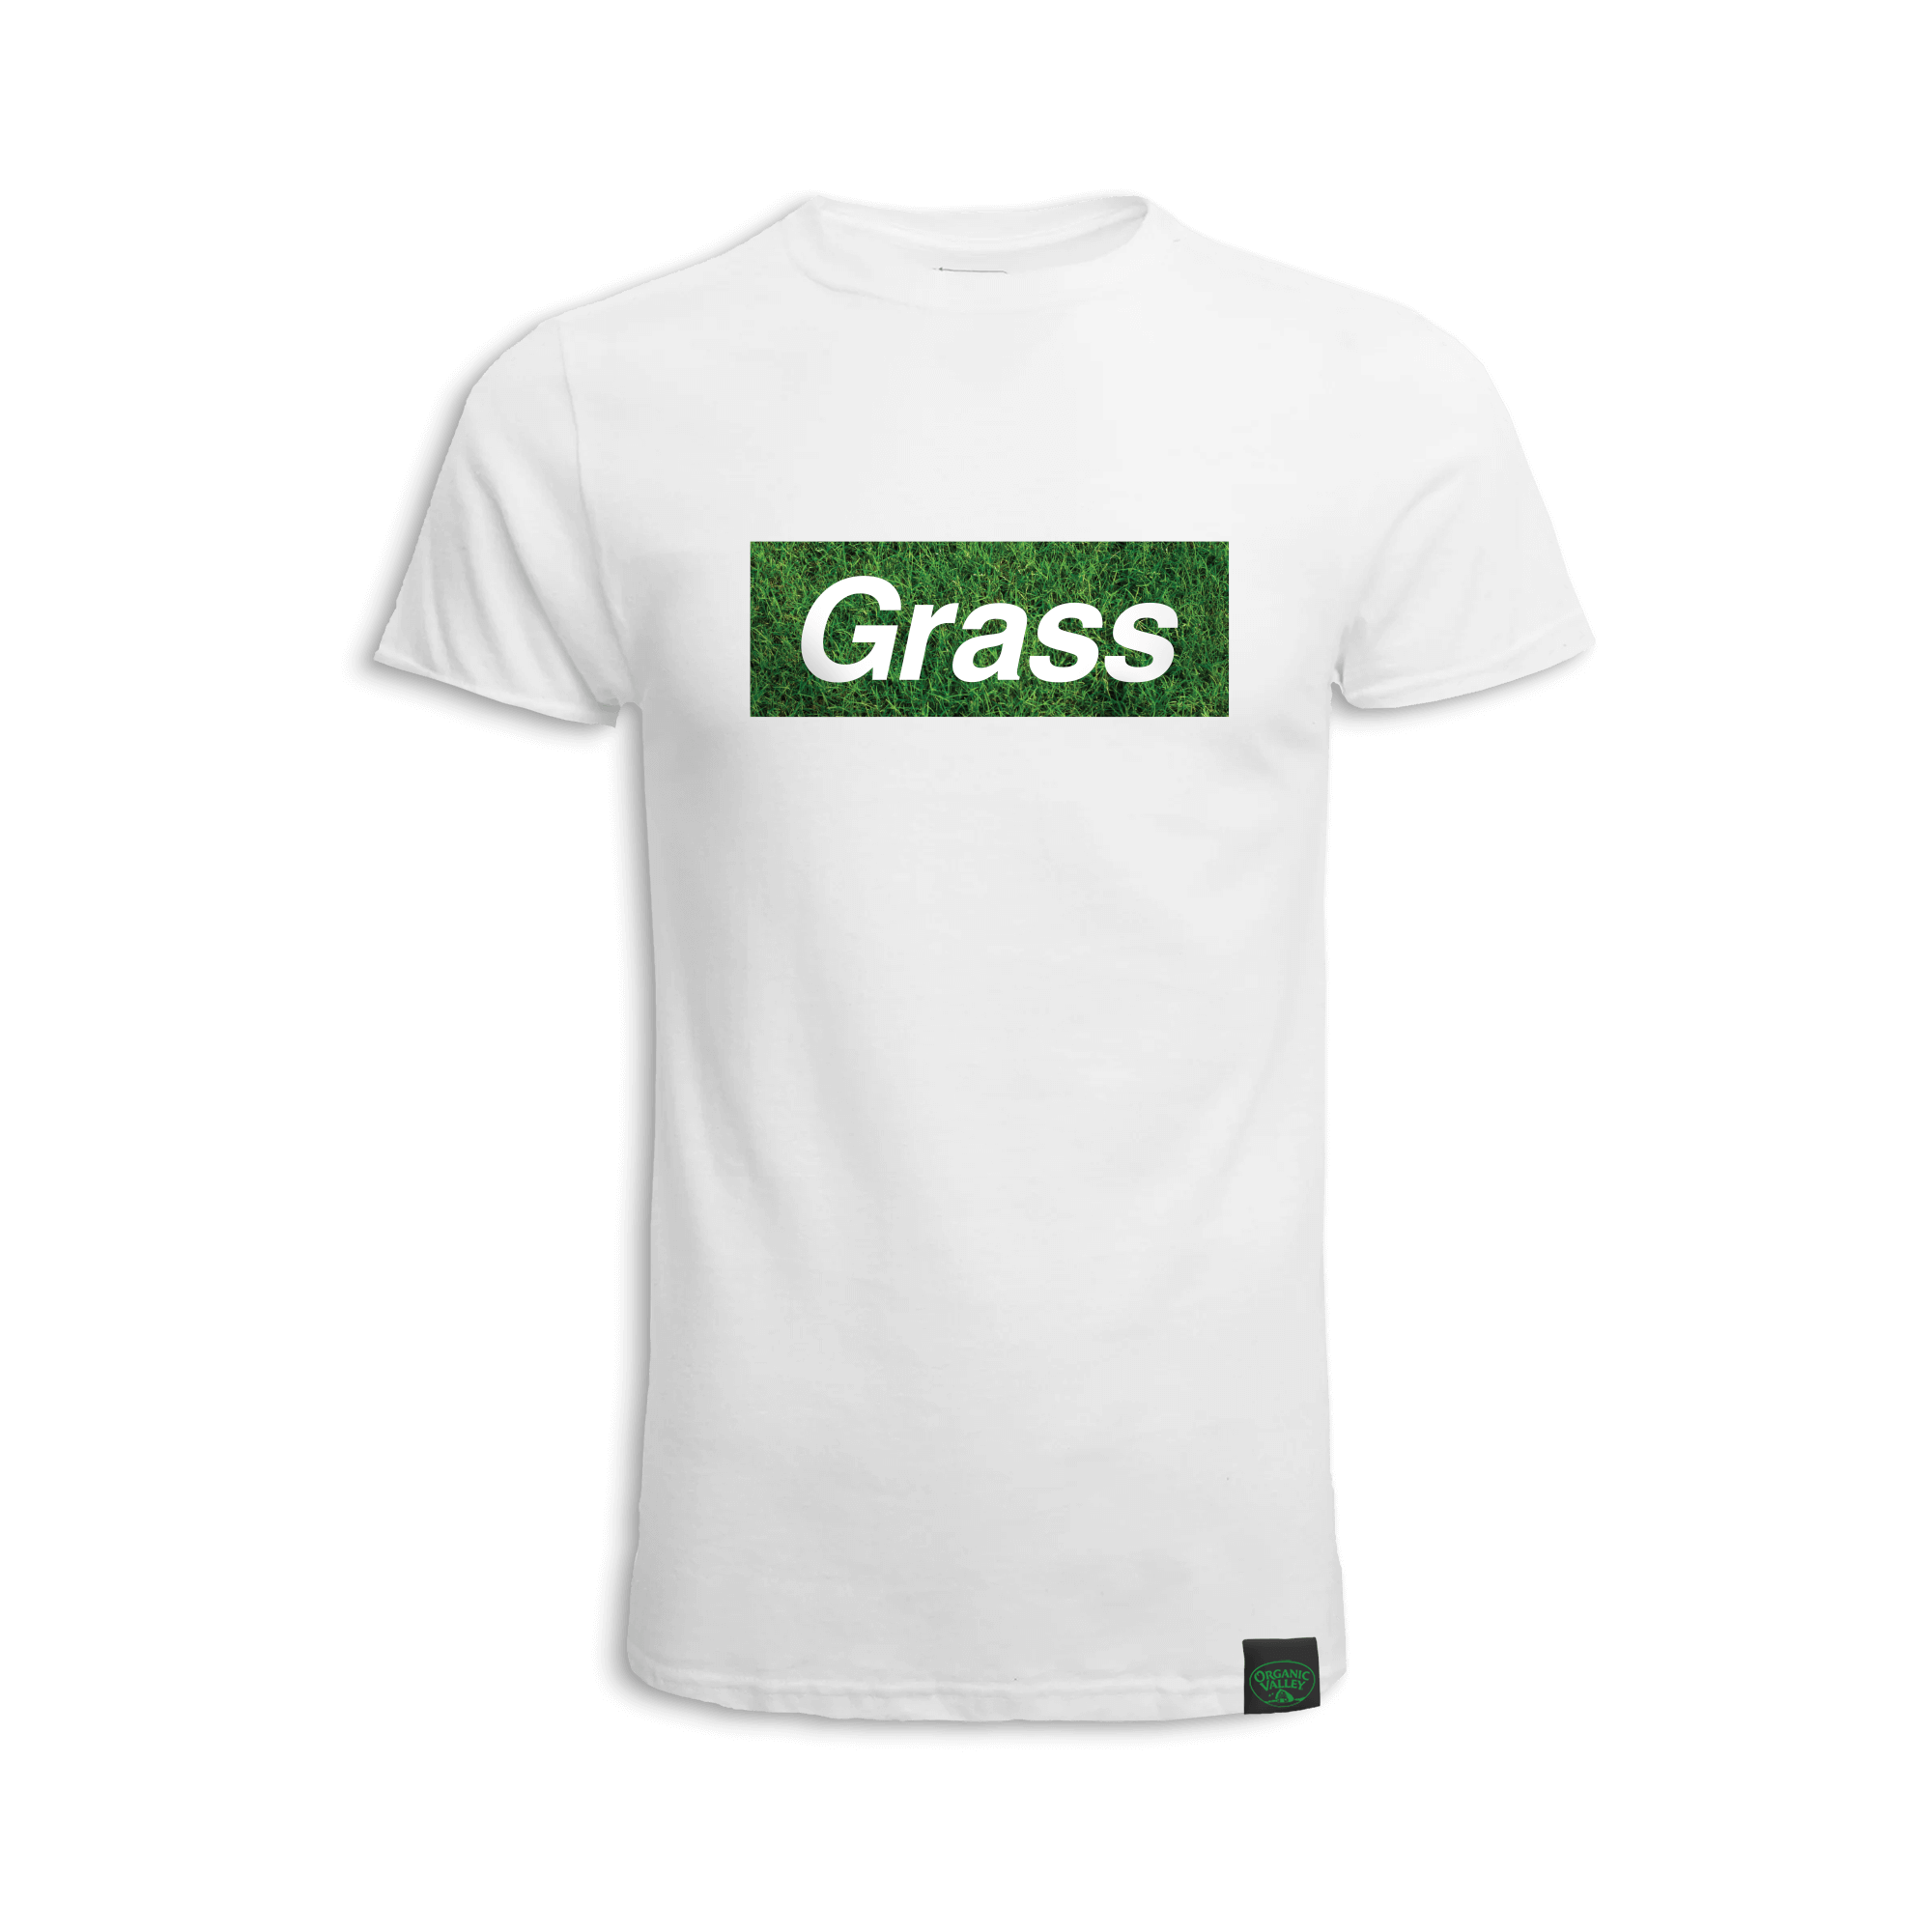 Grass Tee in White color